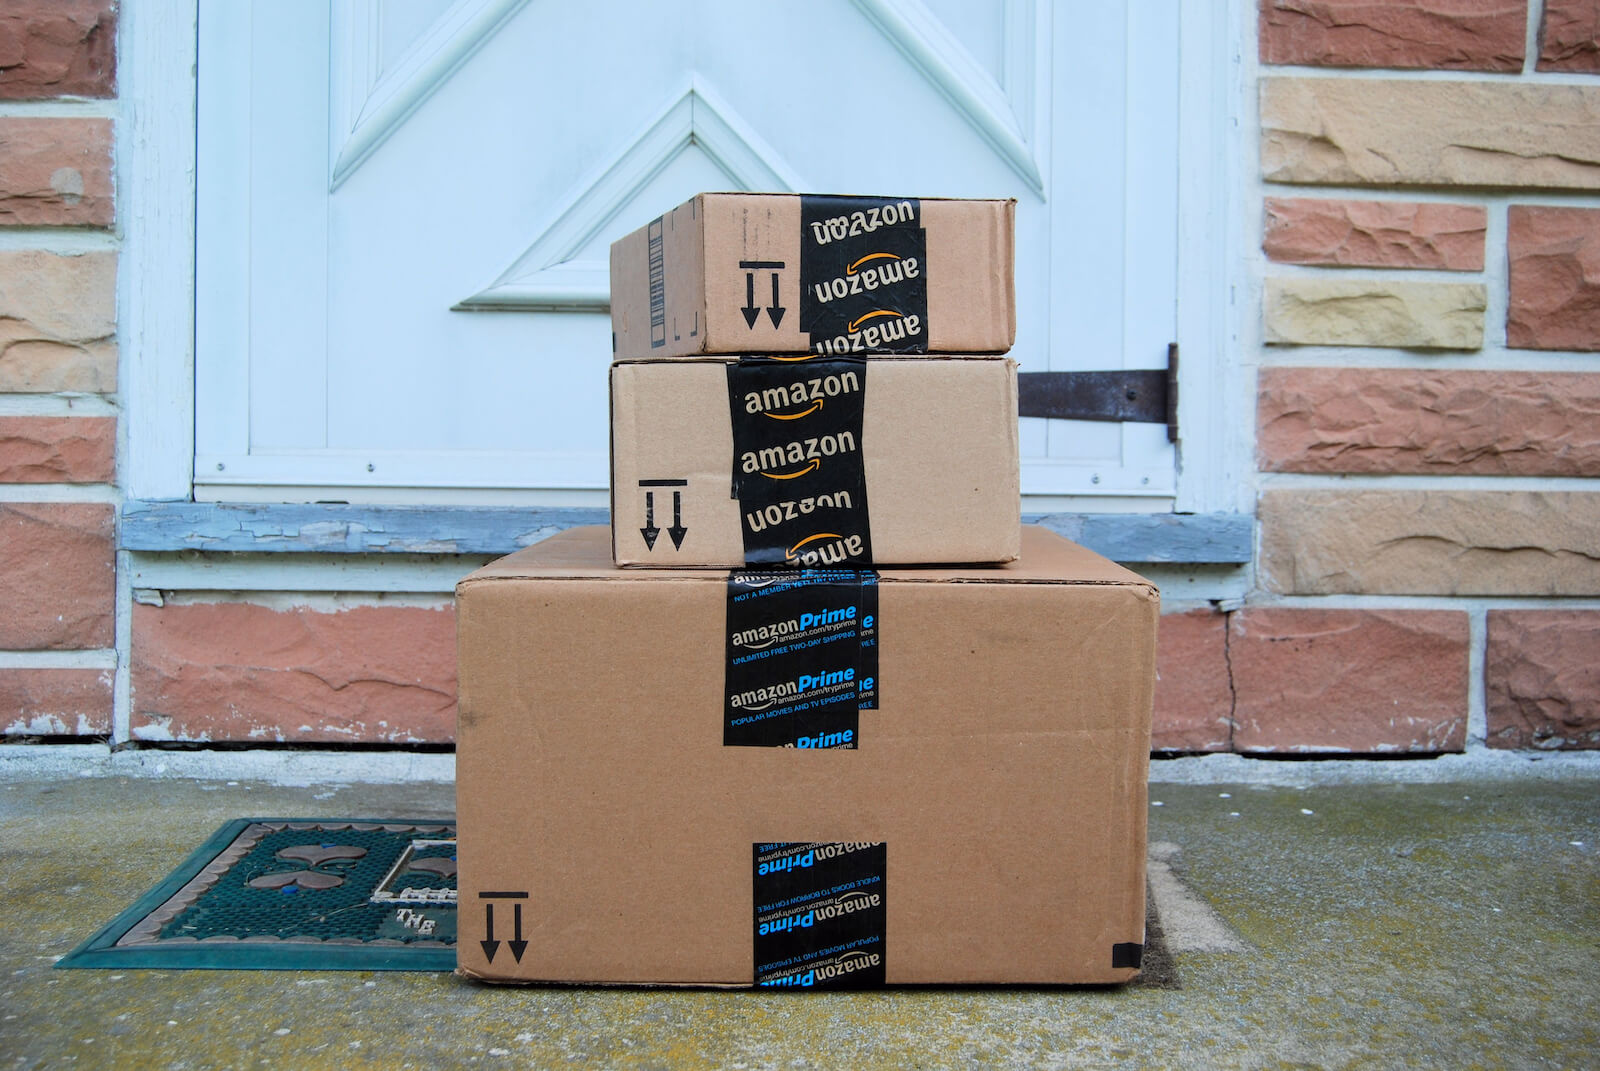 Prime will soon include free 1-day shipping